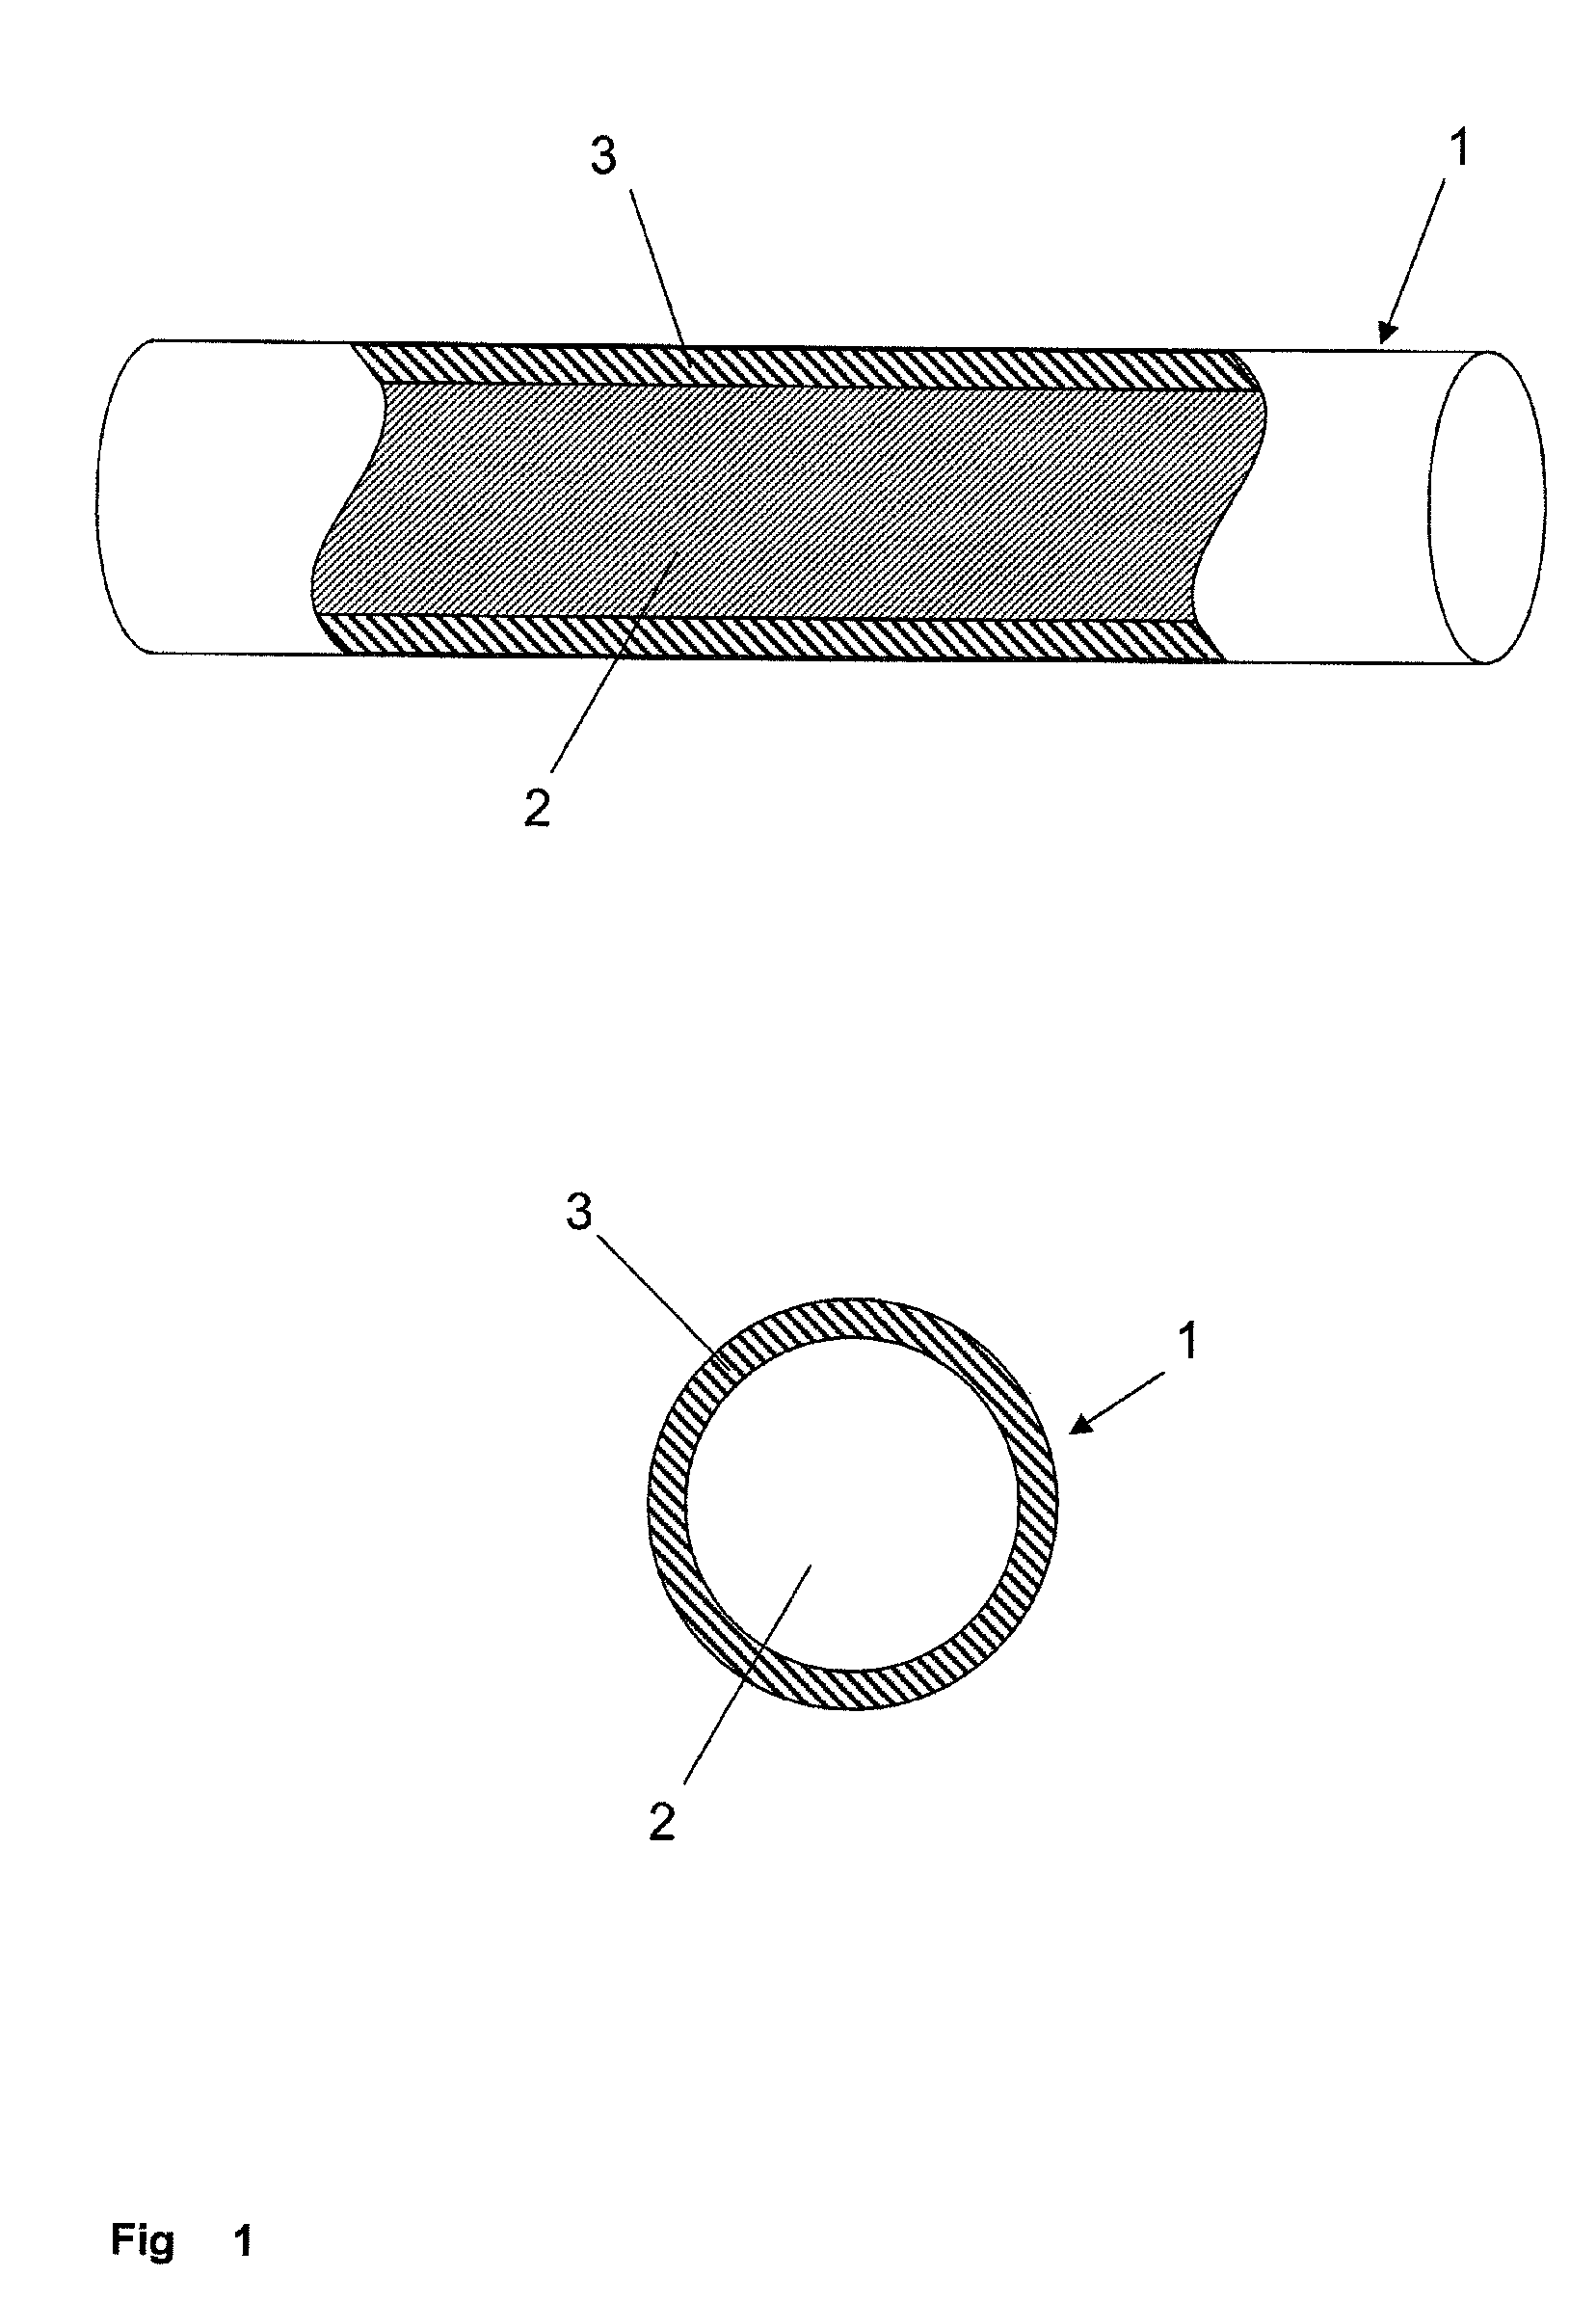 Coated wire and film resistor